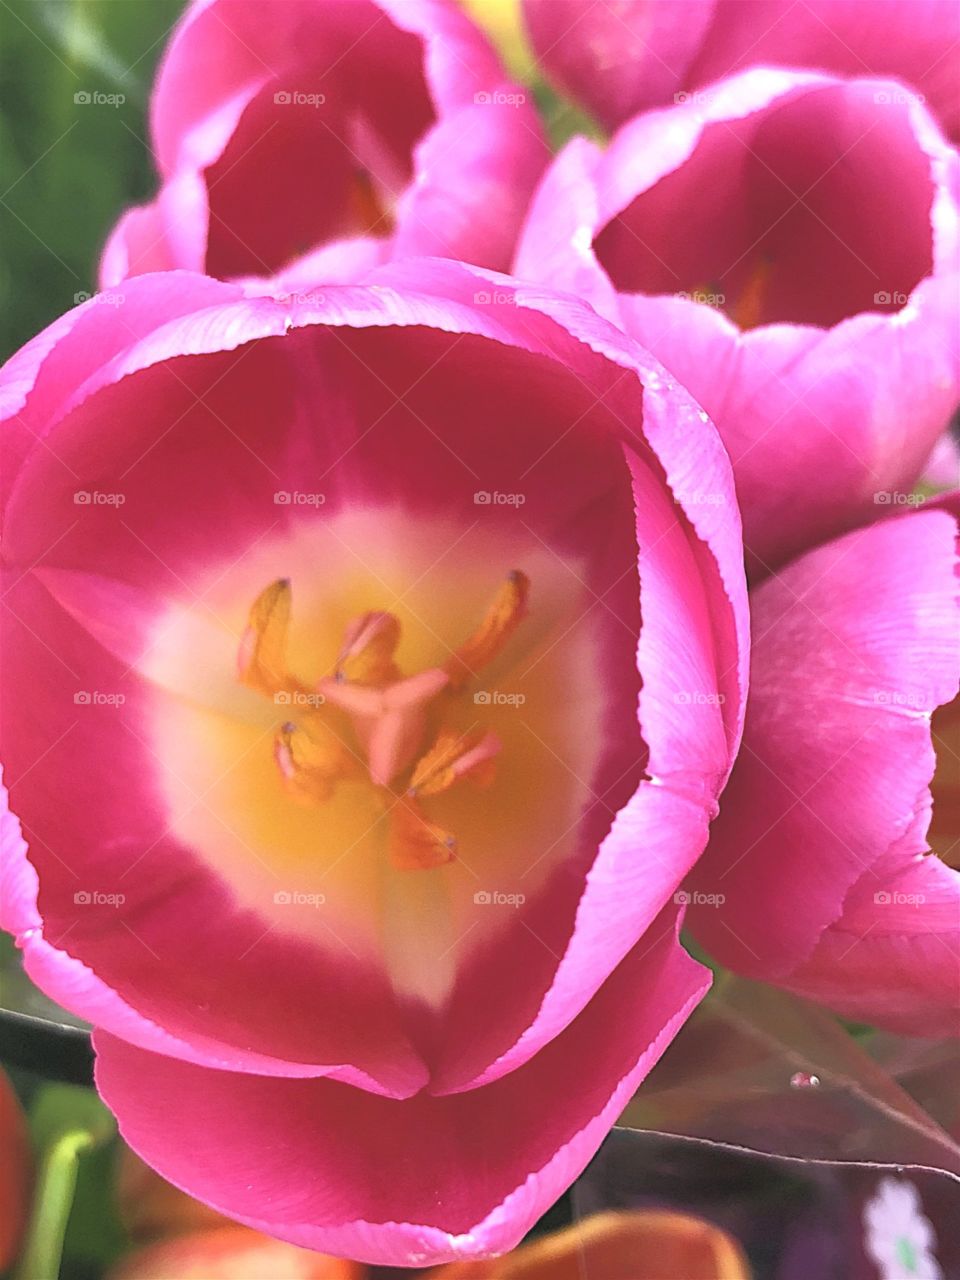 Pink tulips, close-up, shot with iphone 8+ from directly above, focused on the inner layer (shot taken using macro setting via Camera+ app)